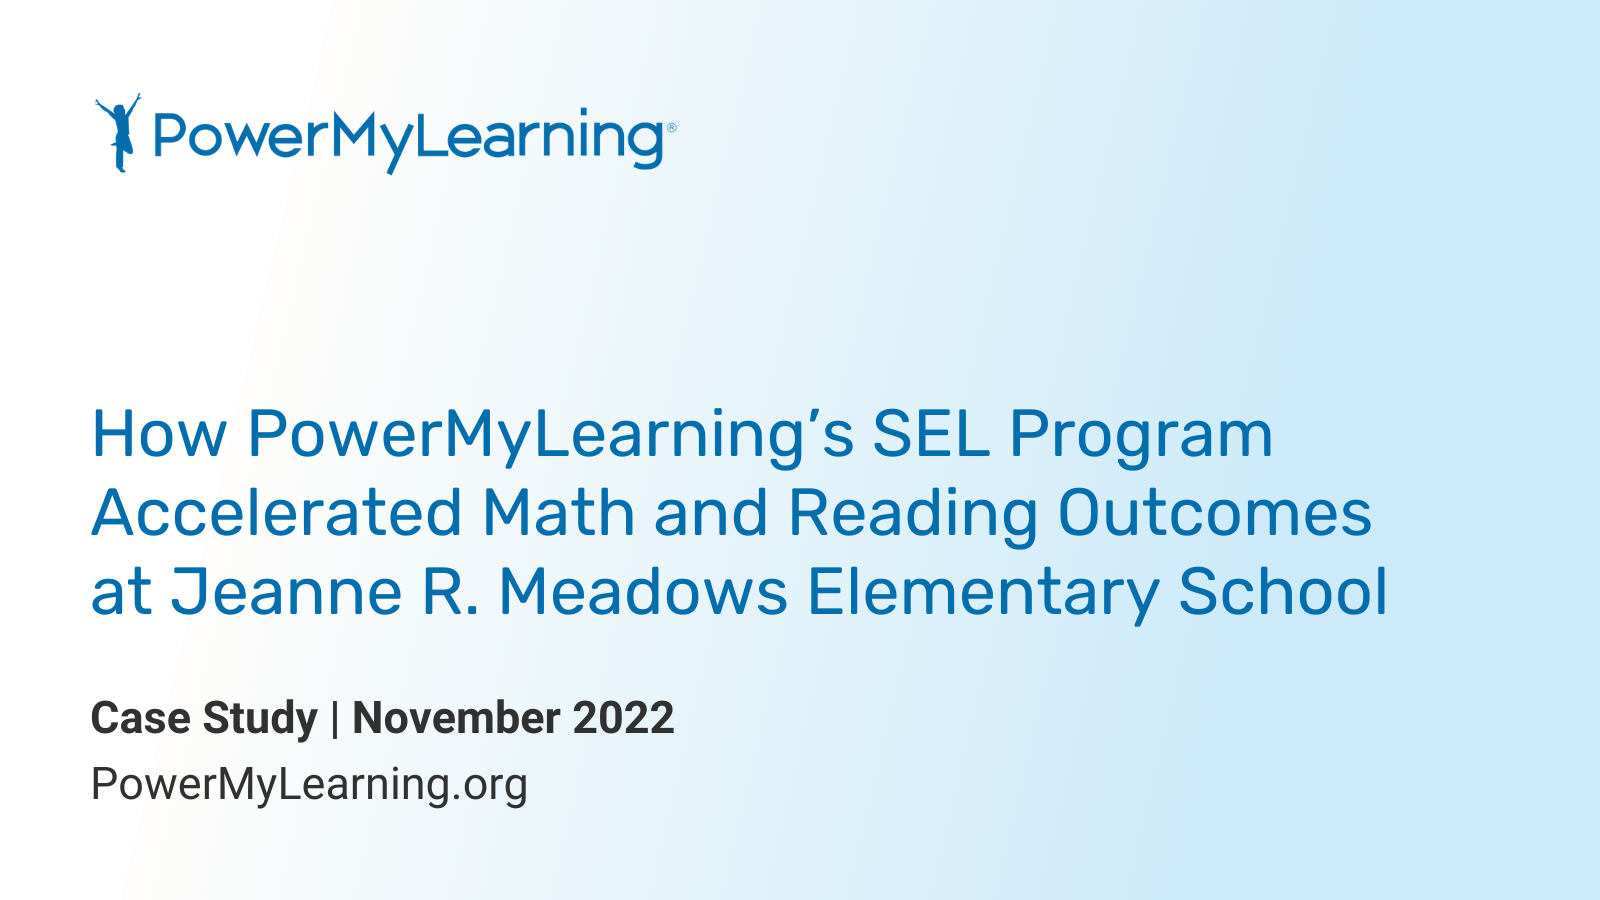 How our SEL program accelerated math and reading outcomes.